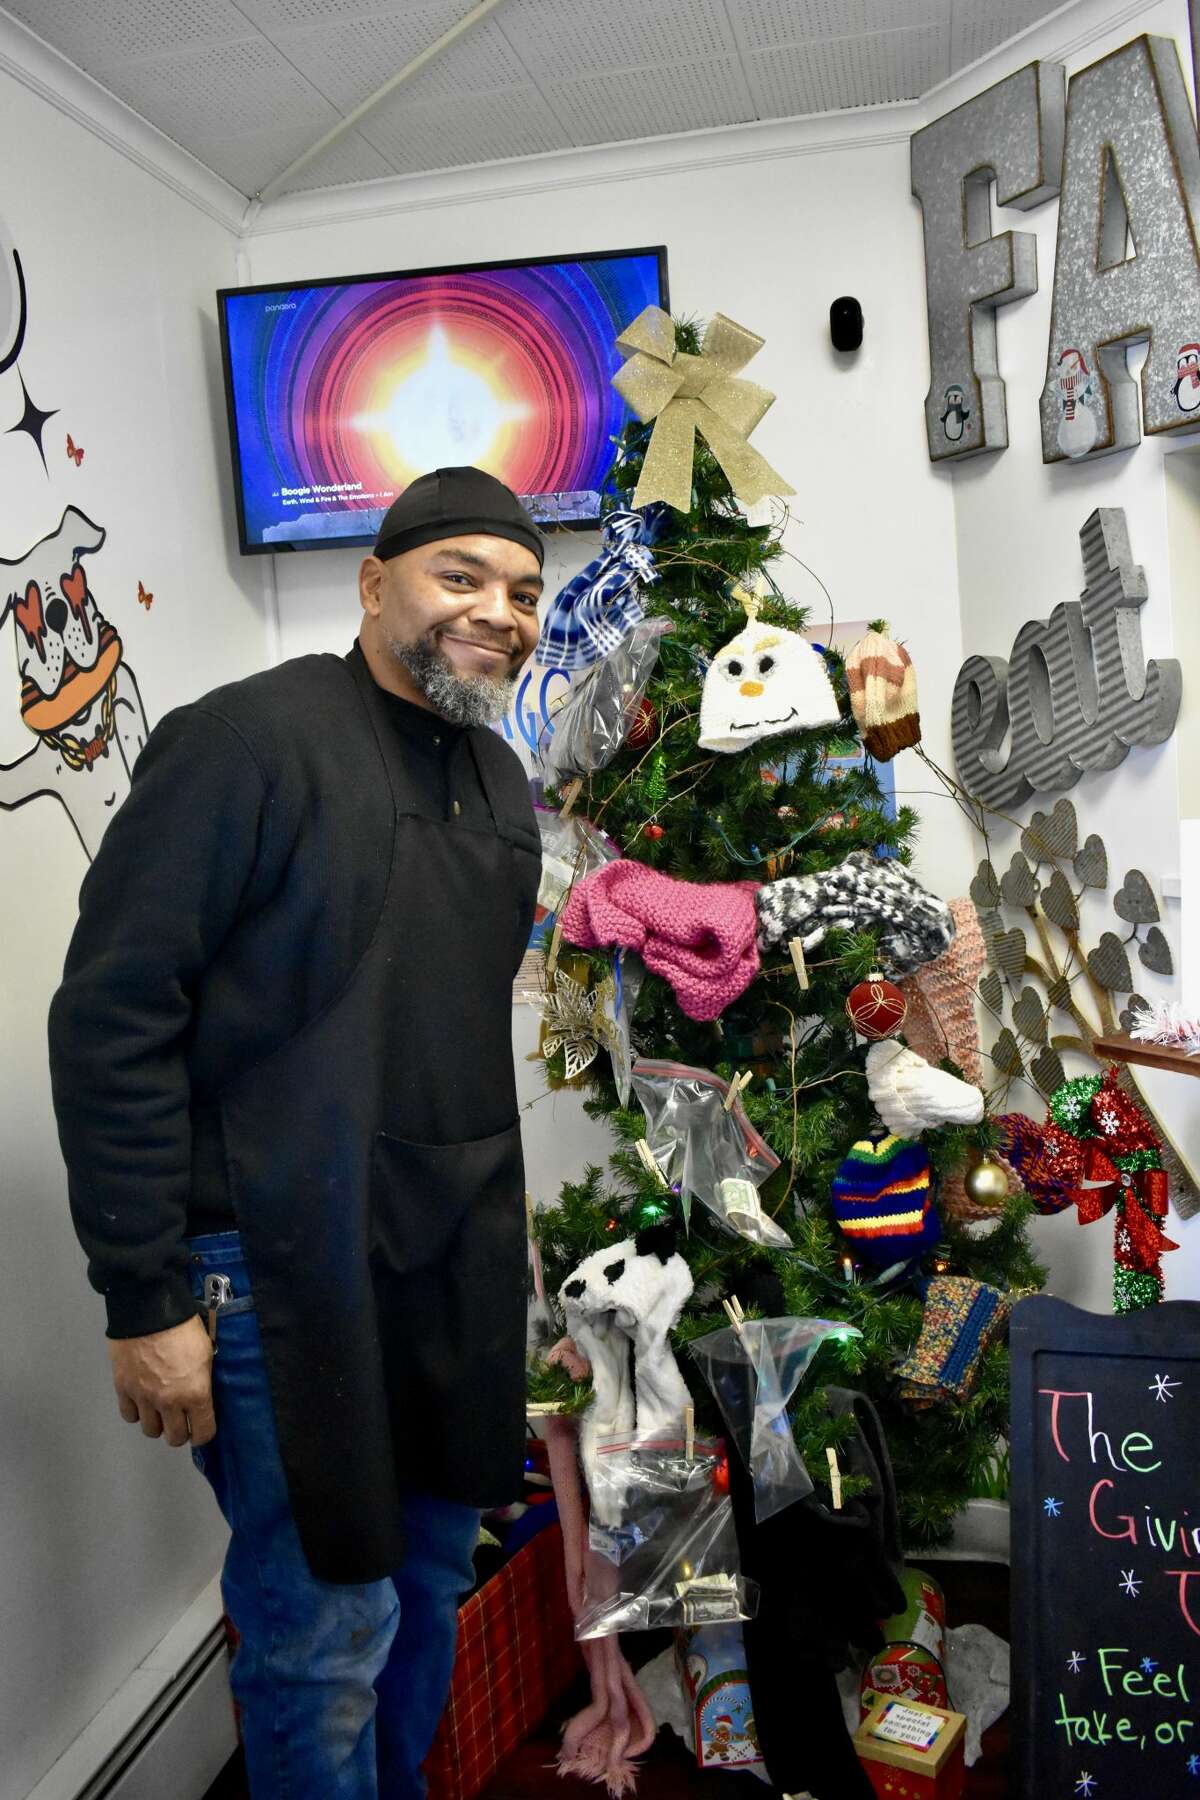 Bernard Agee, owner of Fatty C's Dog House, recently put up a 'giving tree' to help people in need during the holiday season filled up with hand-knitted, colorful hats, gloves and scarves for the taking. 